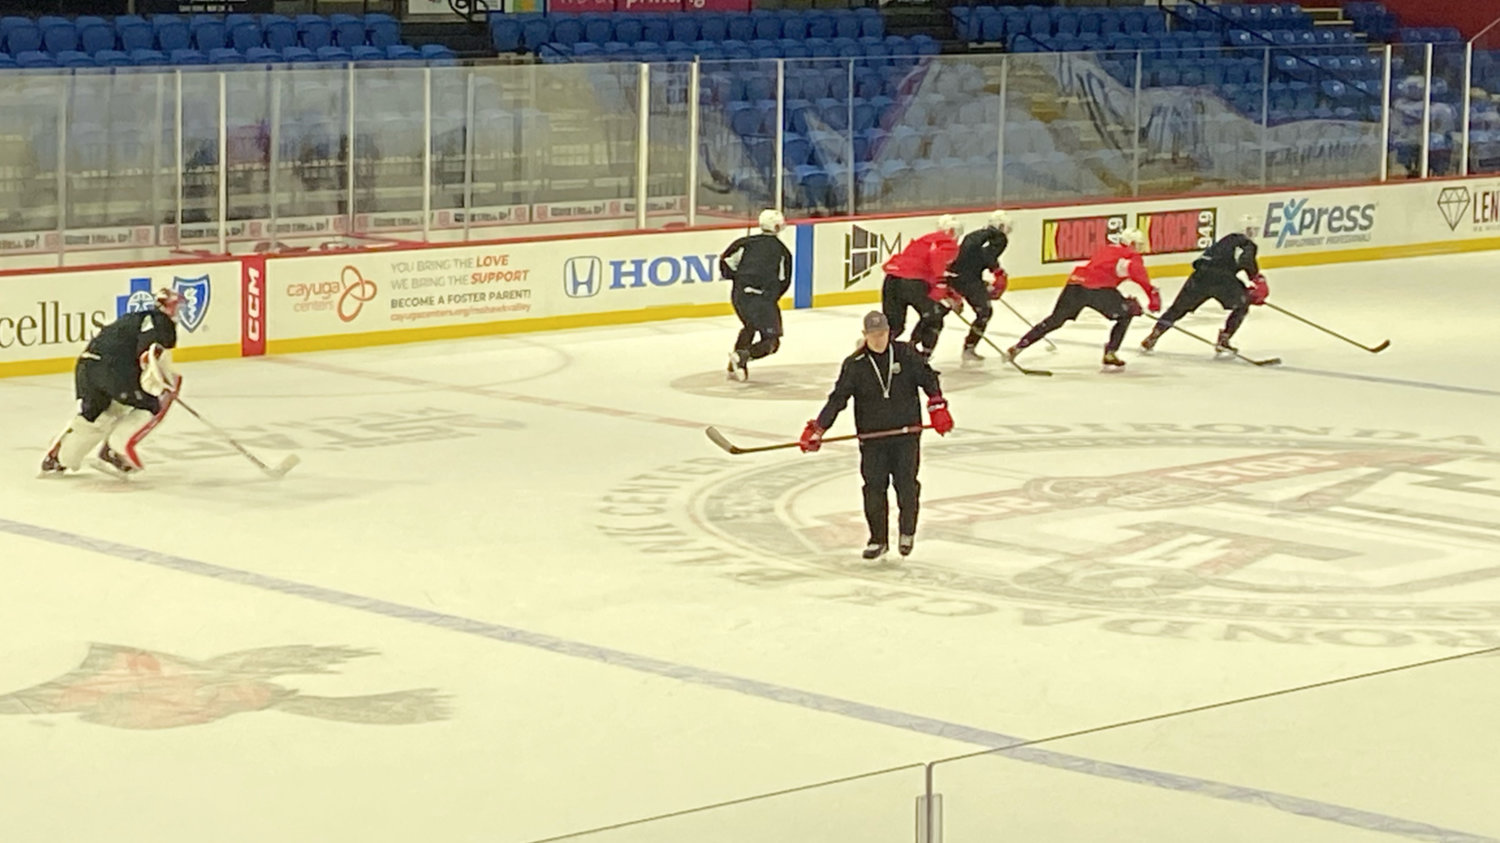 Utica Comets coach Kevin Dineen skates in front of players going through conditioning drills at Tuesday's practice at the Adirondack Bank Center in Utica.